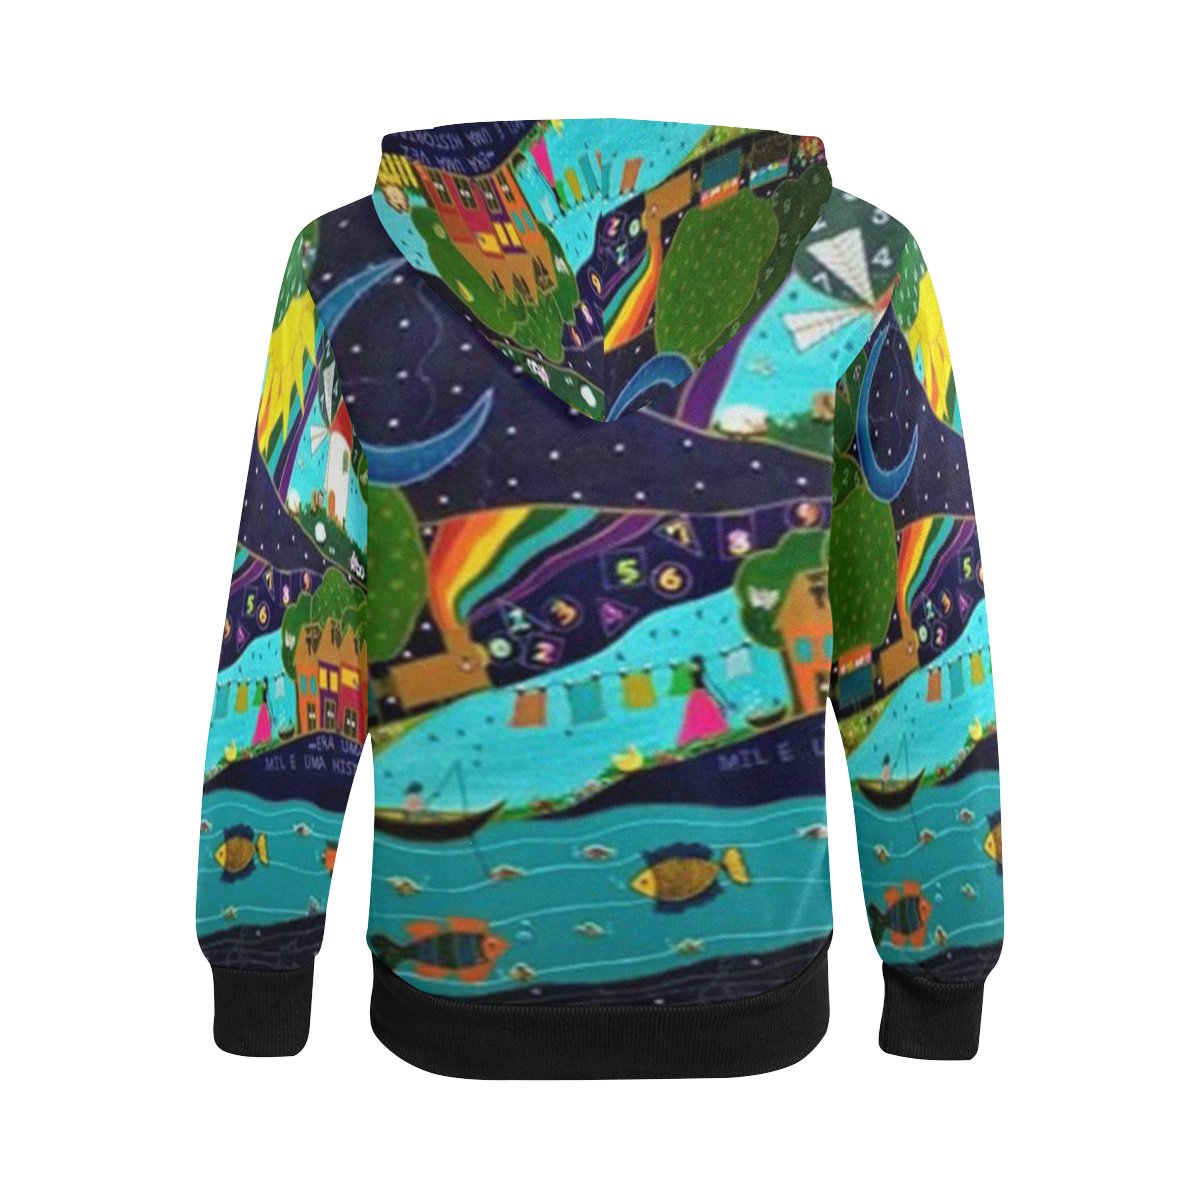 Once upon a time... Kids' All Over Print Full Zip Hoodie (Model H39)